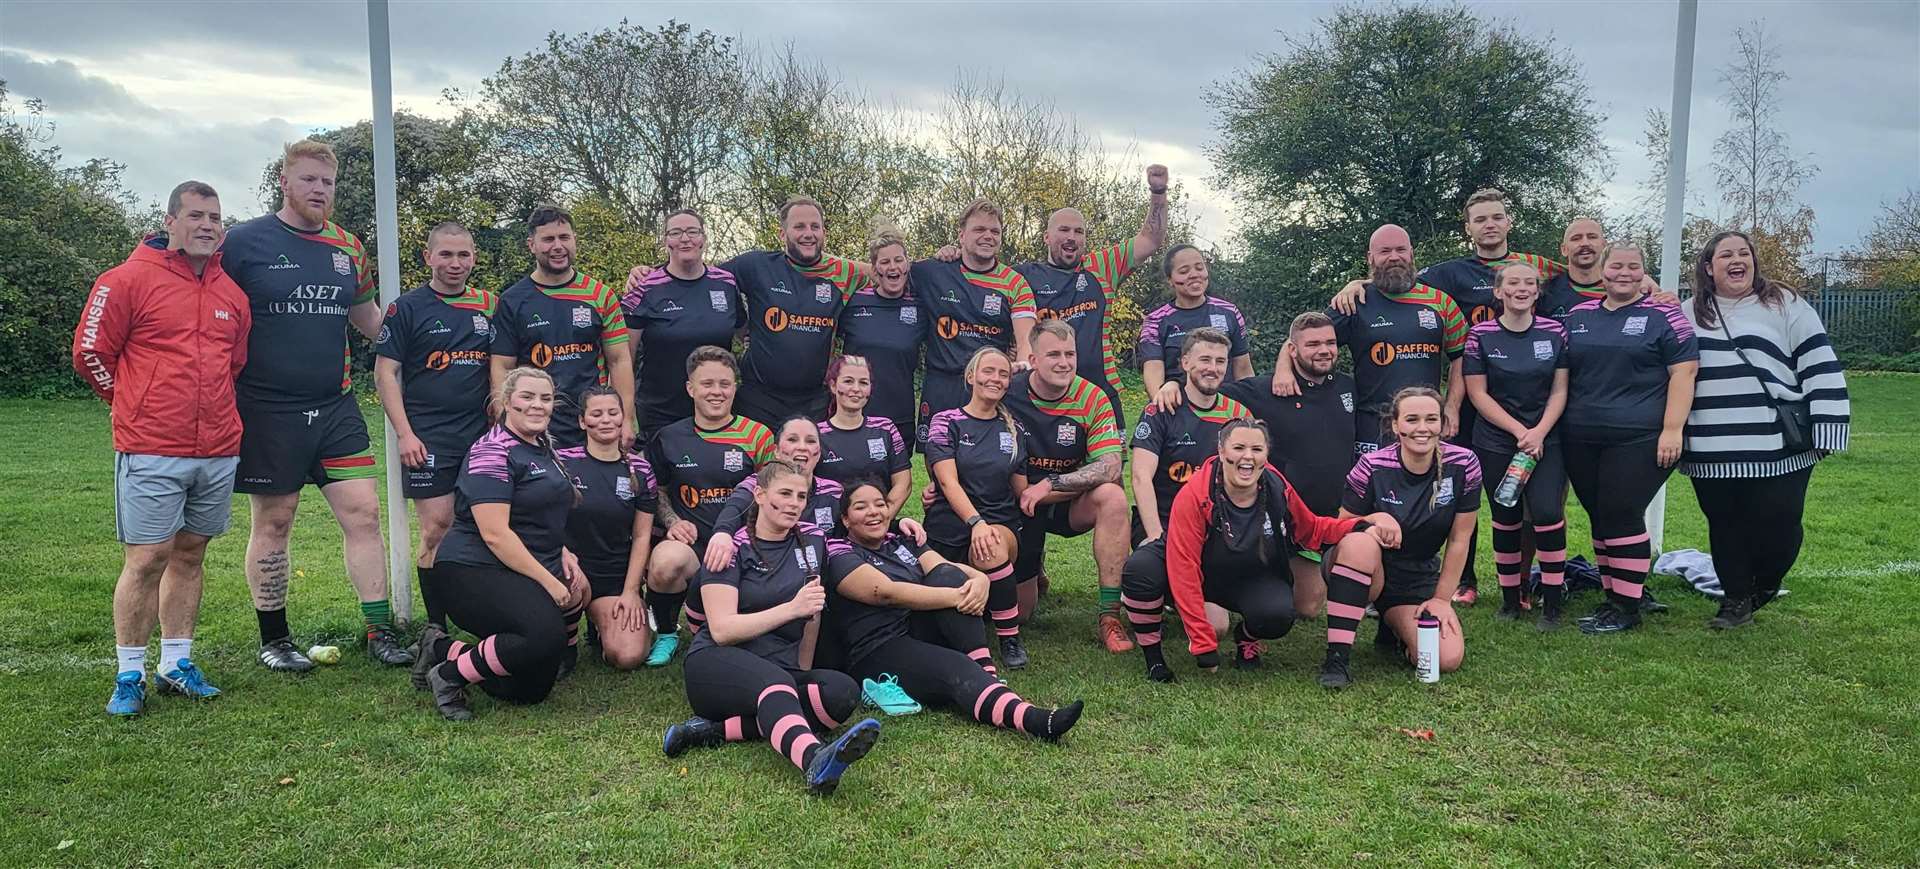 Cliffe Crusaders women's team played their first game against the men's XV, losing a touch rugby match by just two points